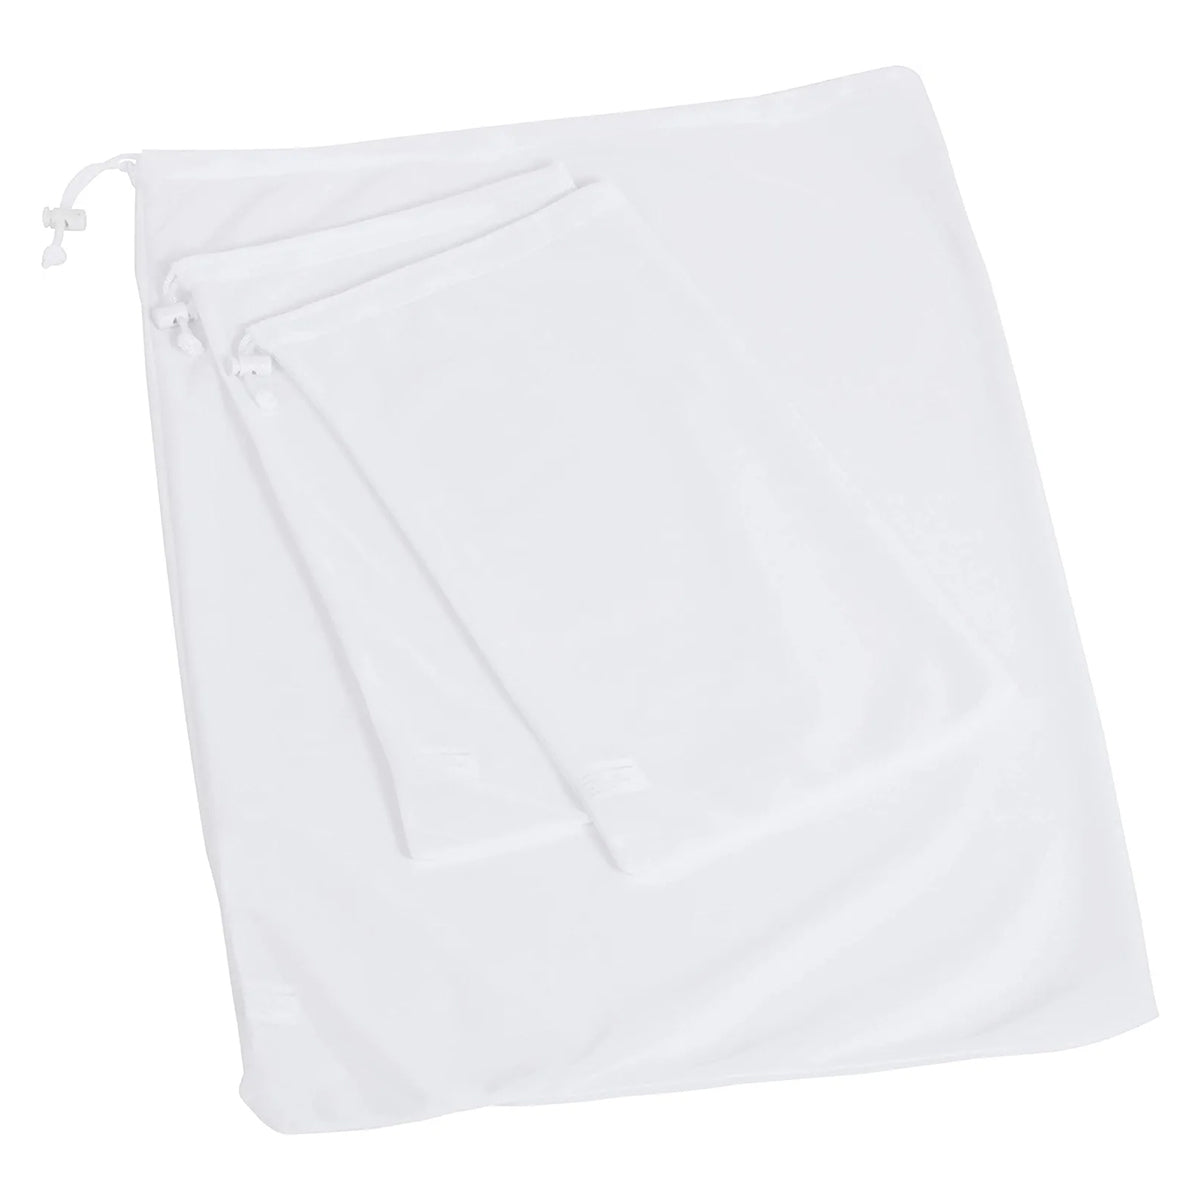 Mainstays Delicates White Polyester Mesh Bag with Zipper Closure, Size: 15  x 18